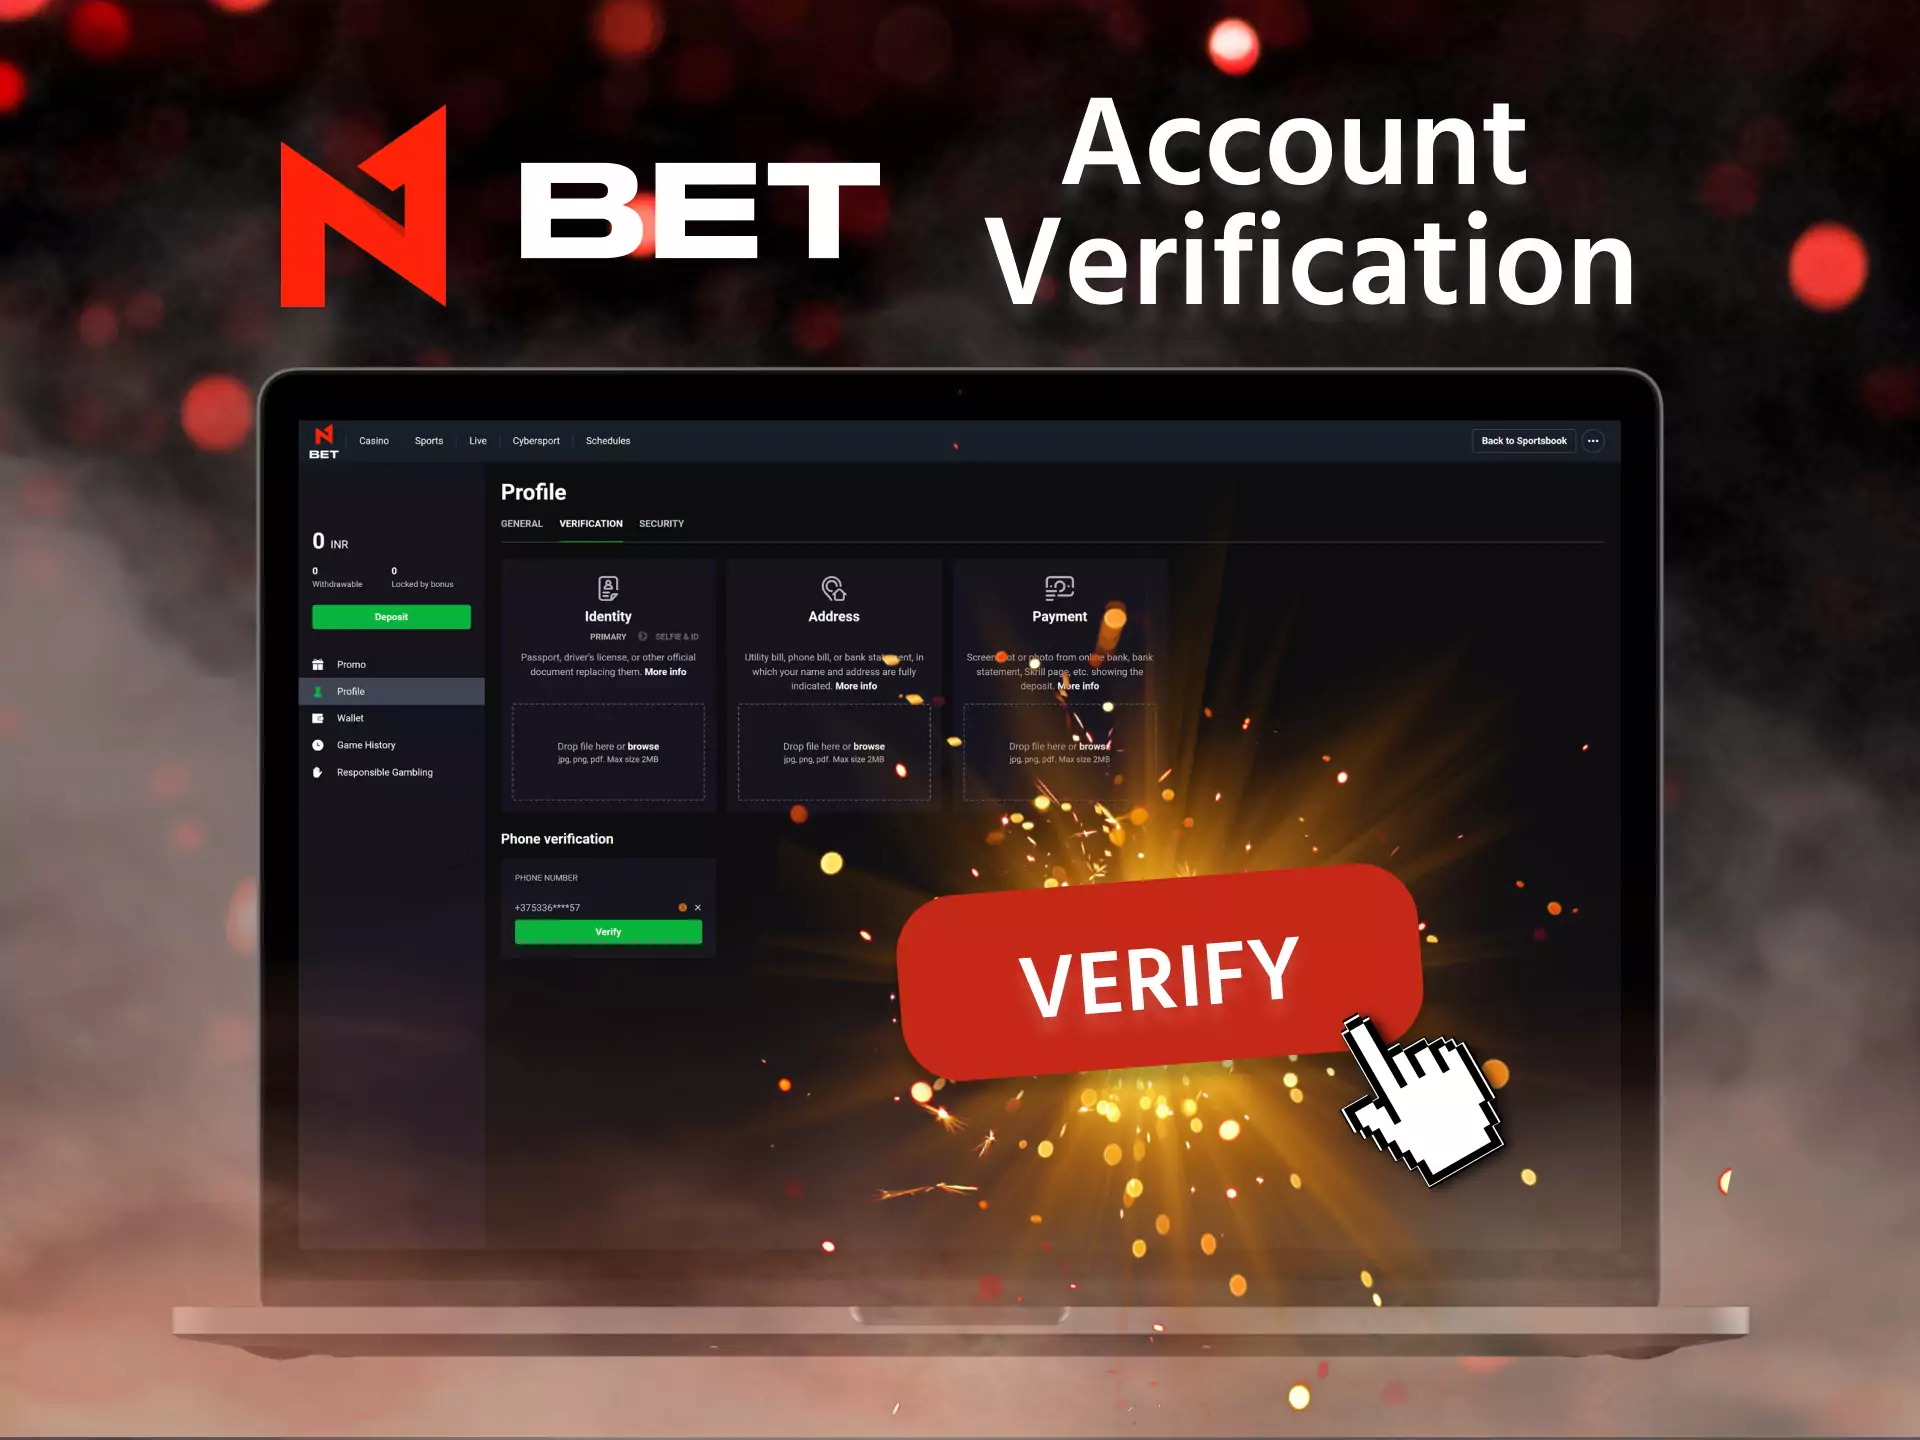 Use the instructions and verify your identity in N1Bet.